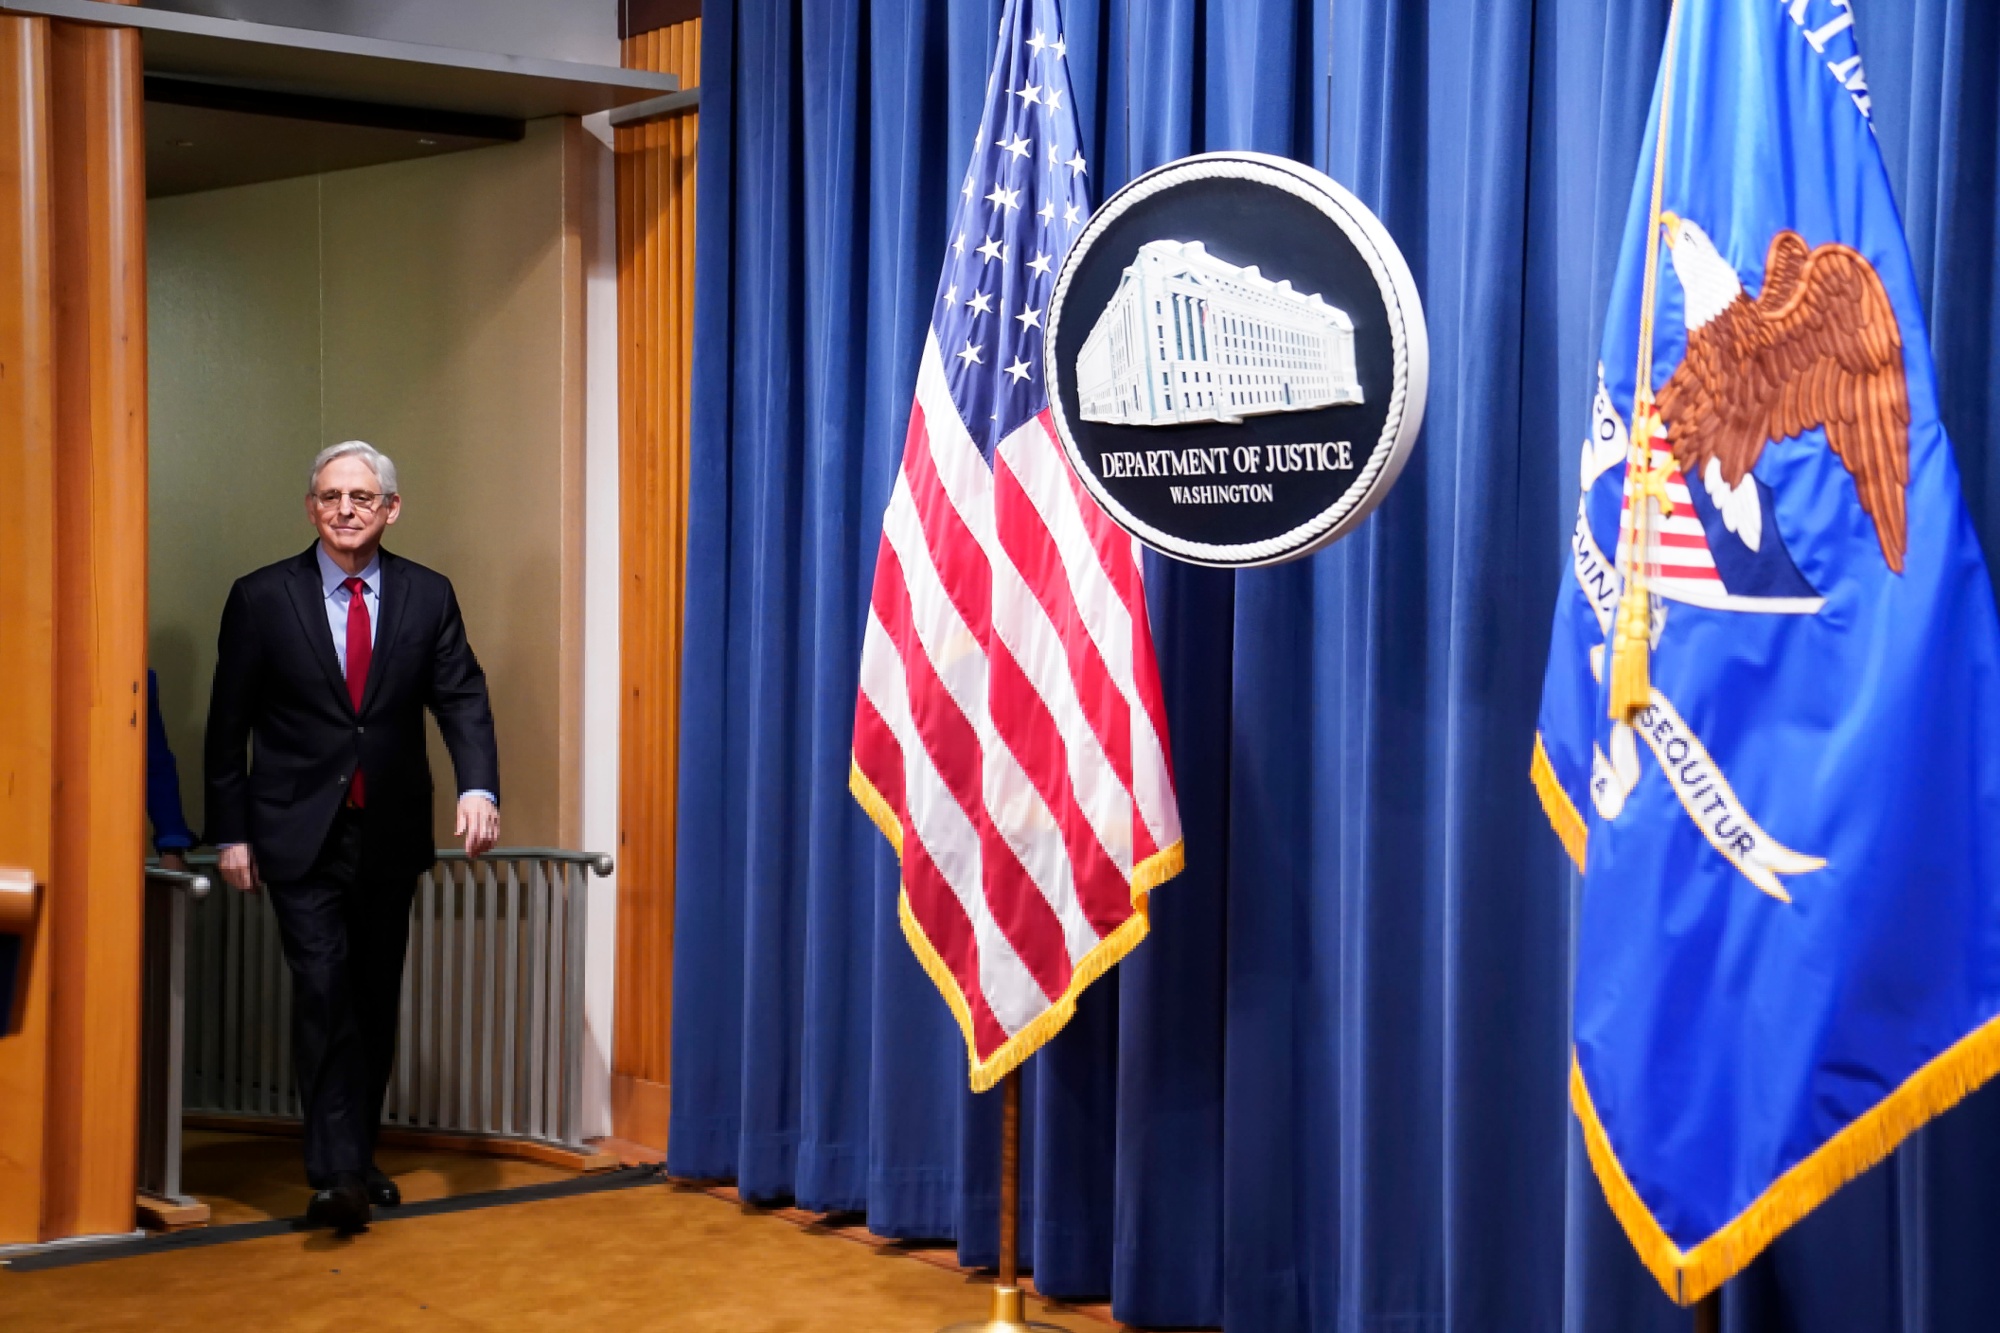 US Attorney General&nbsp;Merrick Garland arrives for a news conference at the Department of Justice in Washington Thursday. The US Justice Department and 16 attorneys general sued Apple, accusing the iPhone maker of violating antitrust laws by blocking rivals from accessing hardware and software features on its devices.